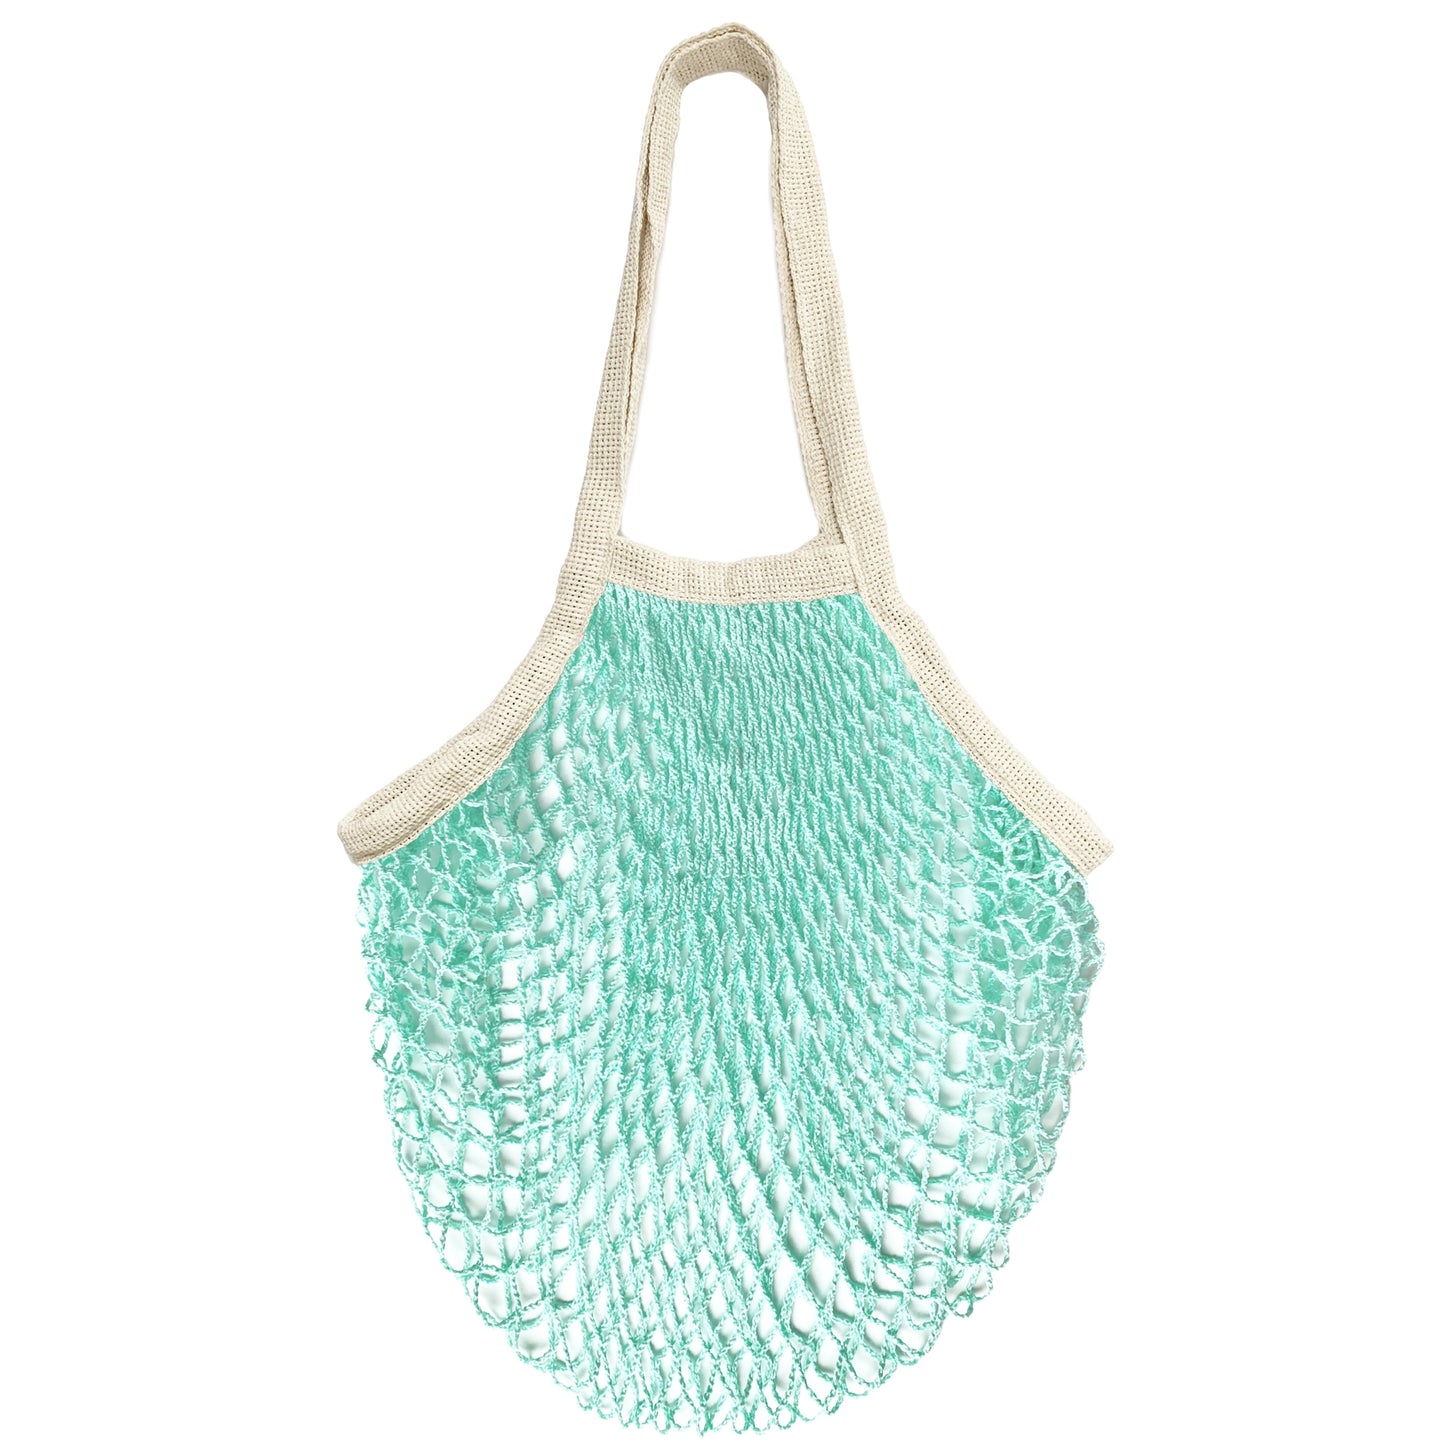 The French Market Bag in Mint